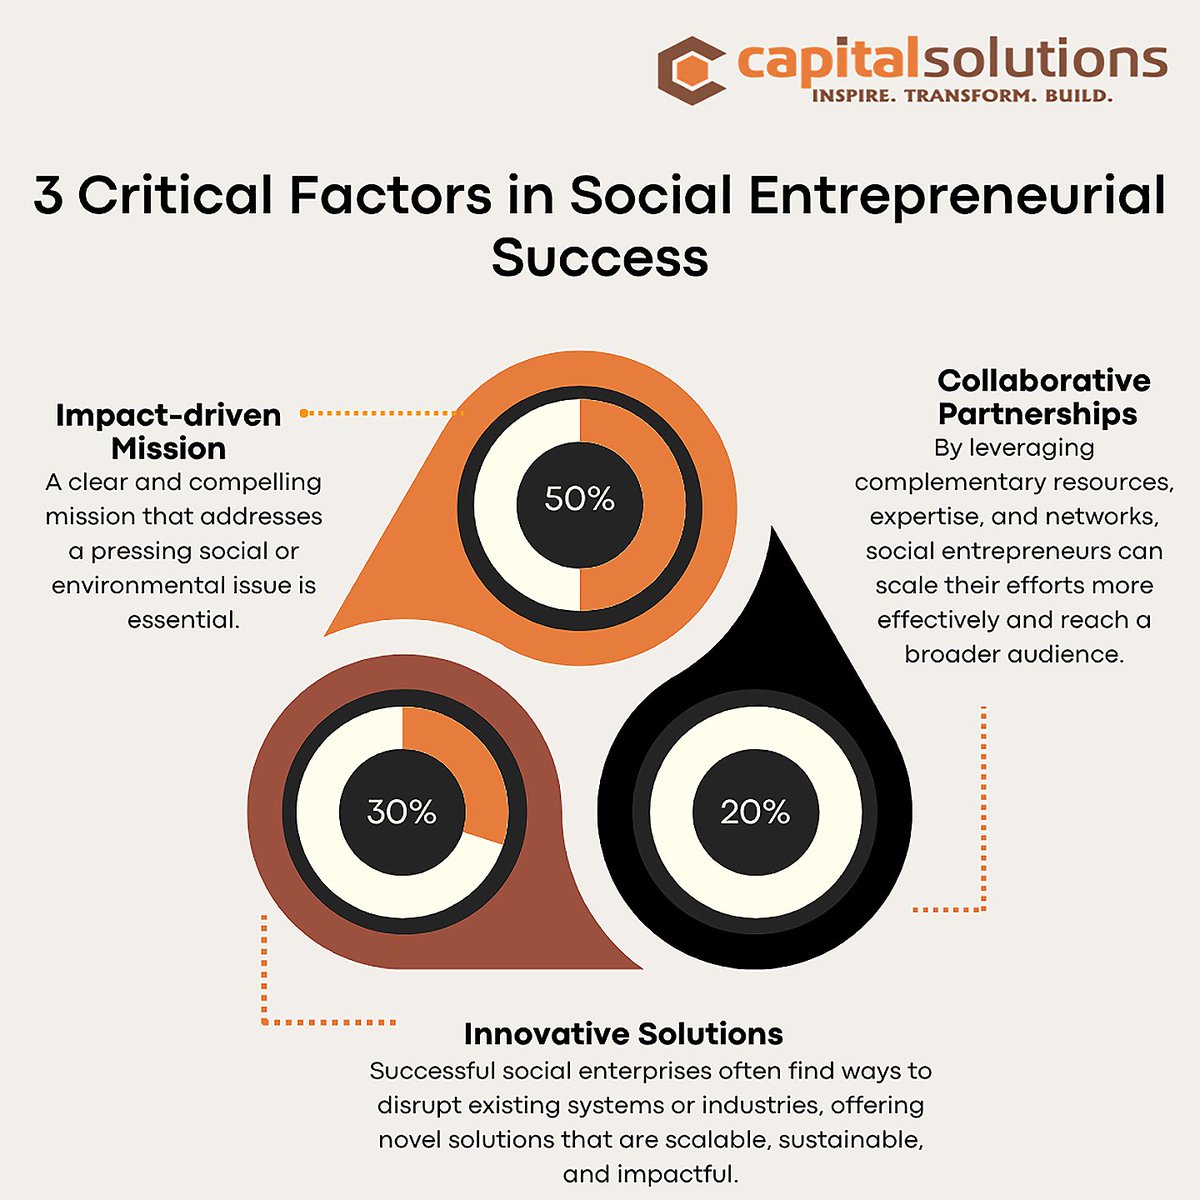 Social entrepreneurs: Passion is key, but strategy matters too!! Learn the 3️⃣ key ingredients for success in your social enterprise journey. #SocialEntrepreneurship #Impact #Community